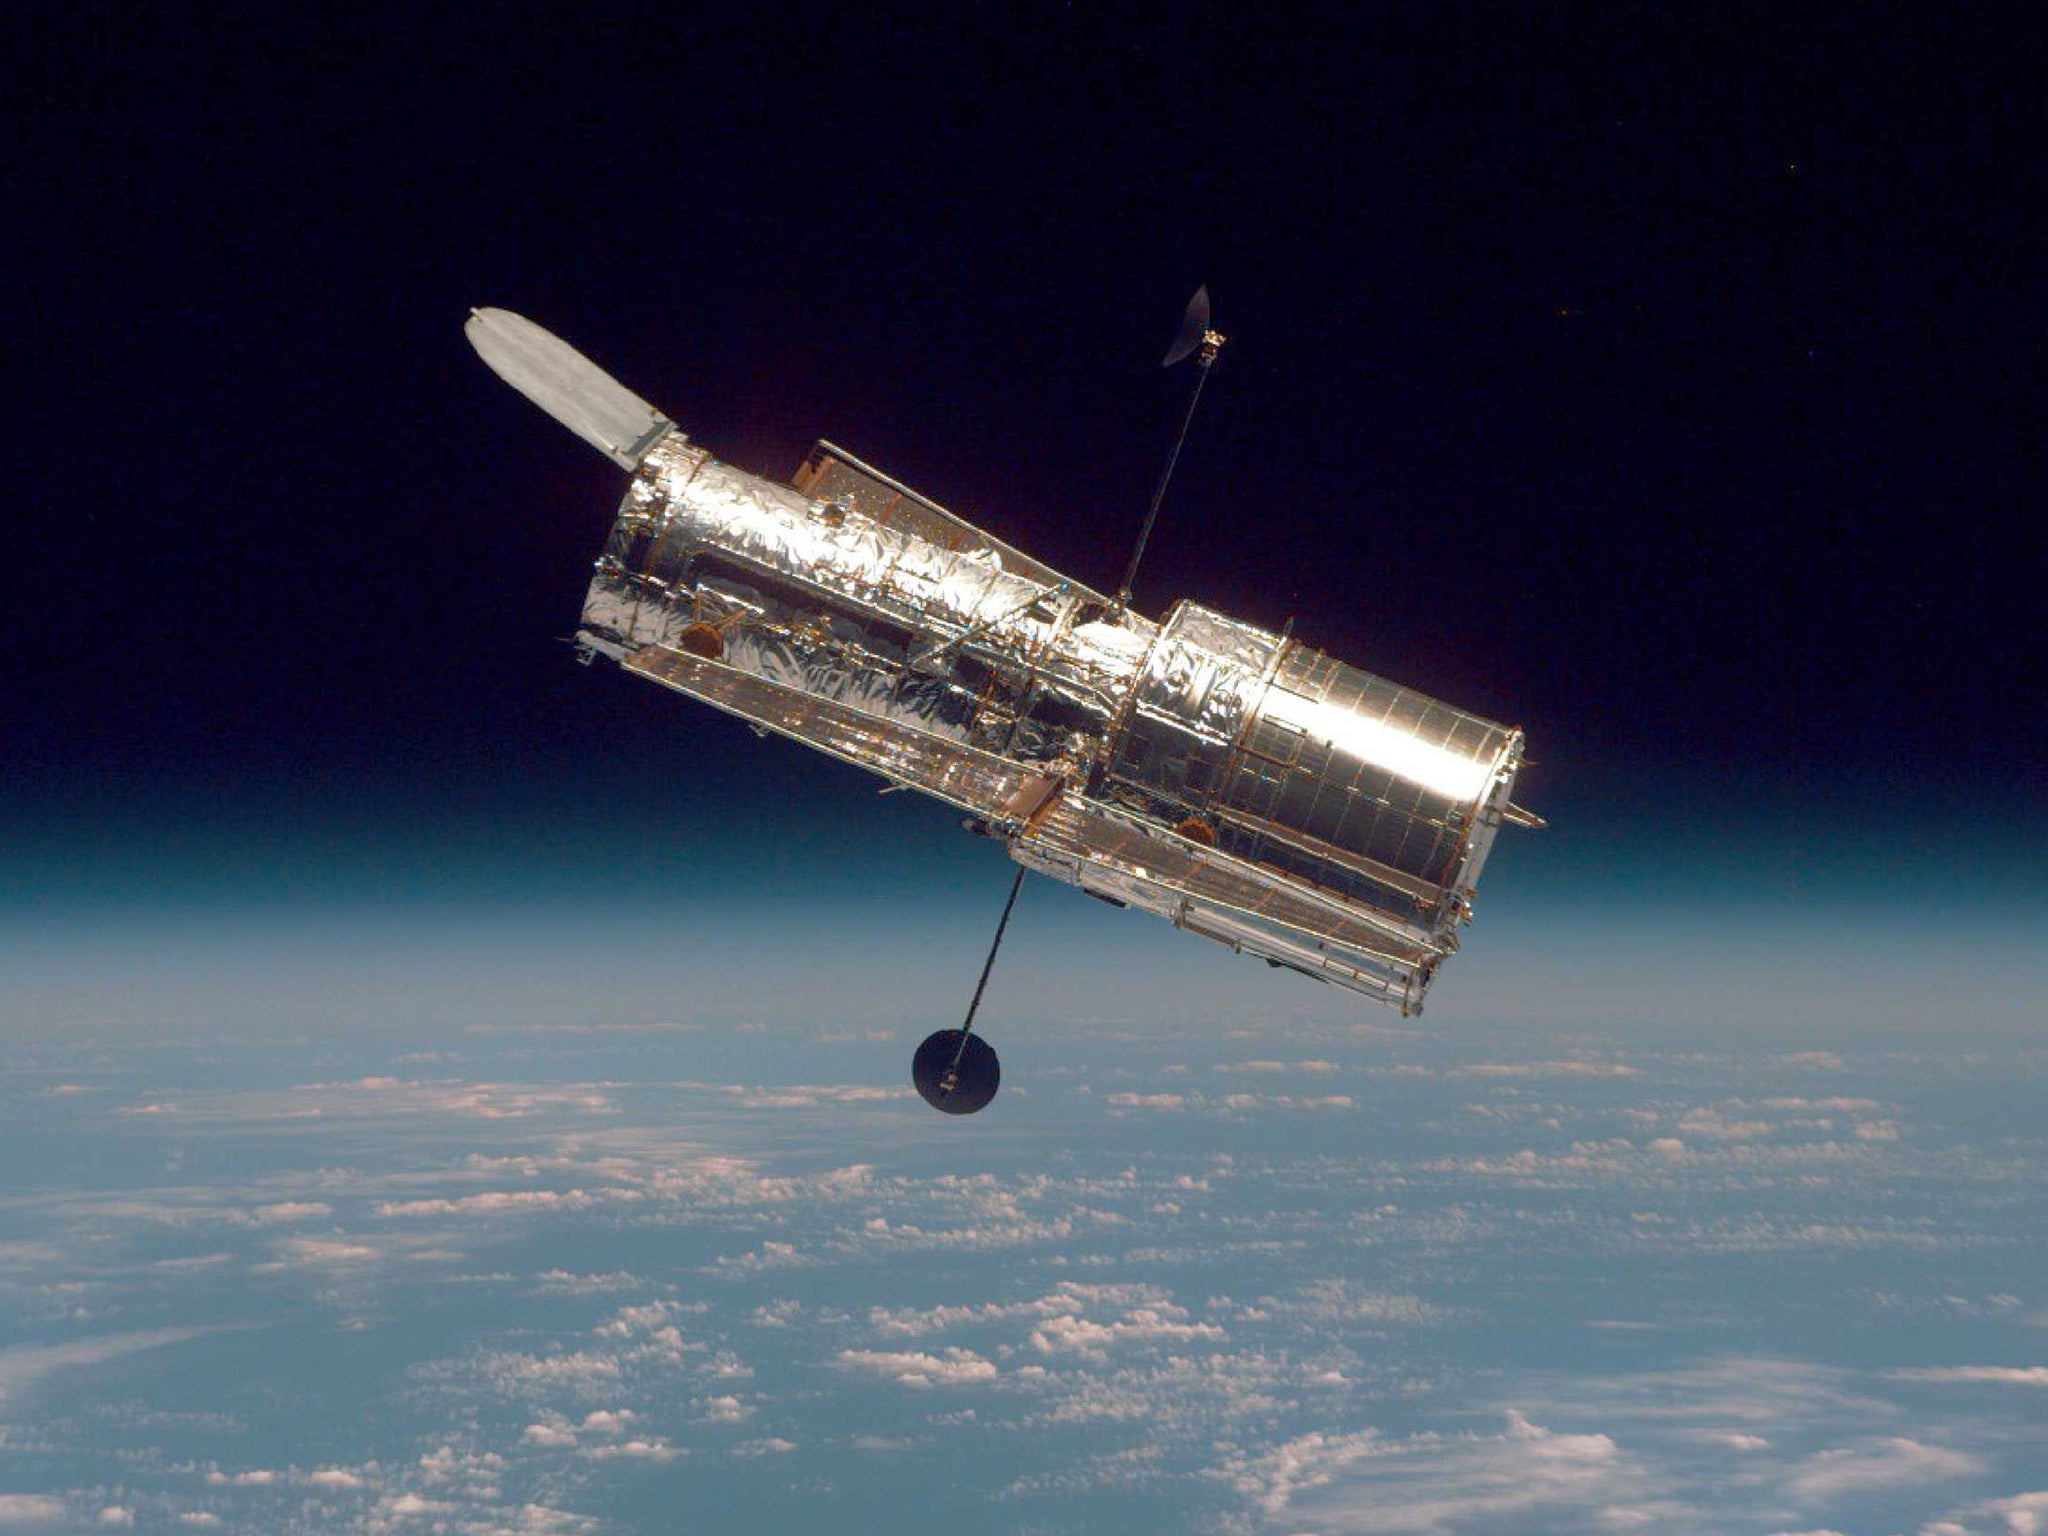 Out of this world: the Hubble is one of the largest space telescopes in operation